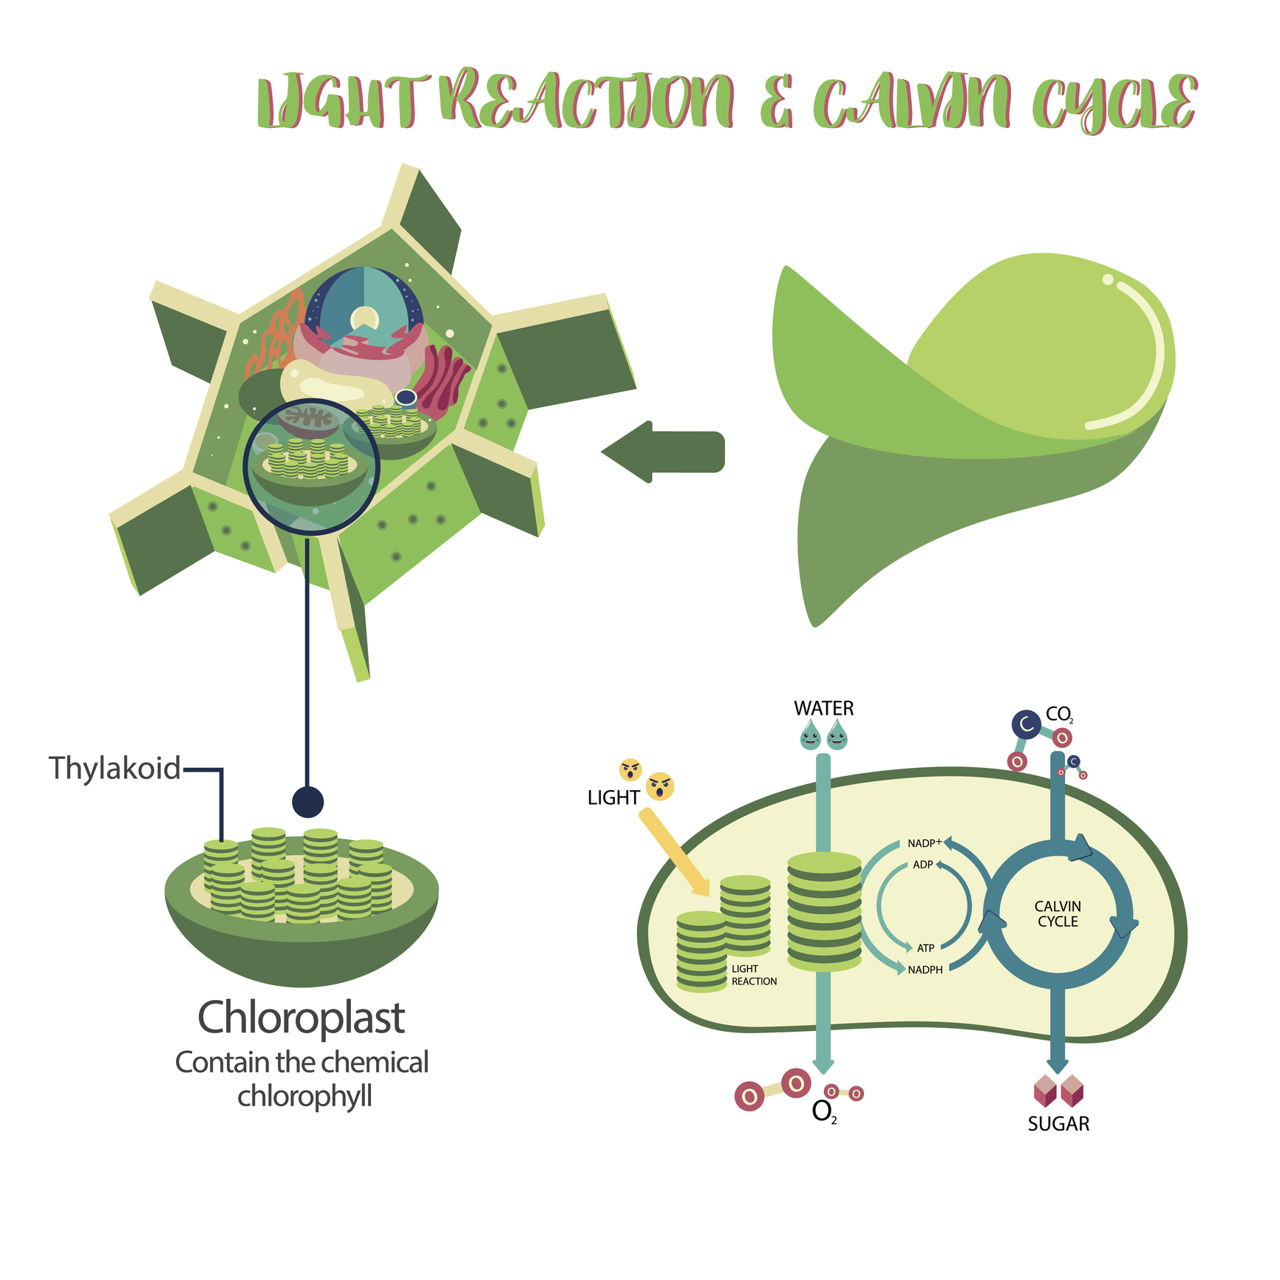 Cellular Respiration Diagram All You Need To Know About Photosynthesis And Cellular Respiration